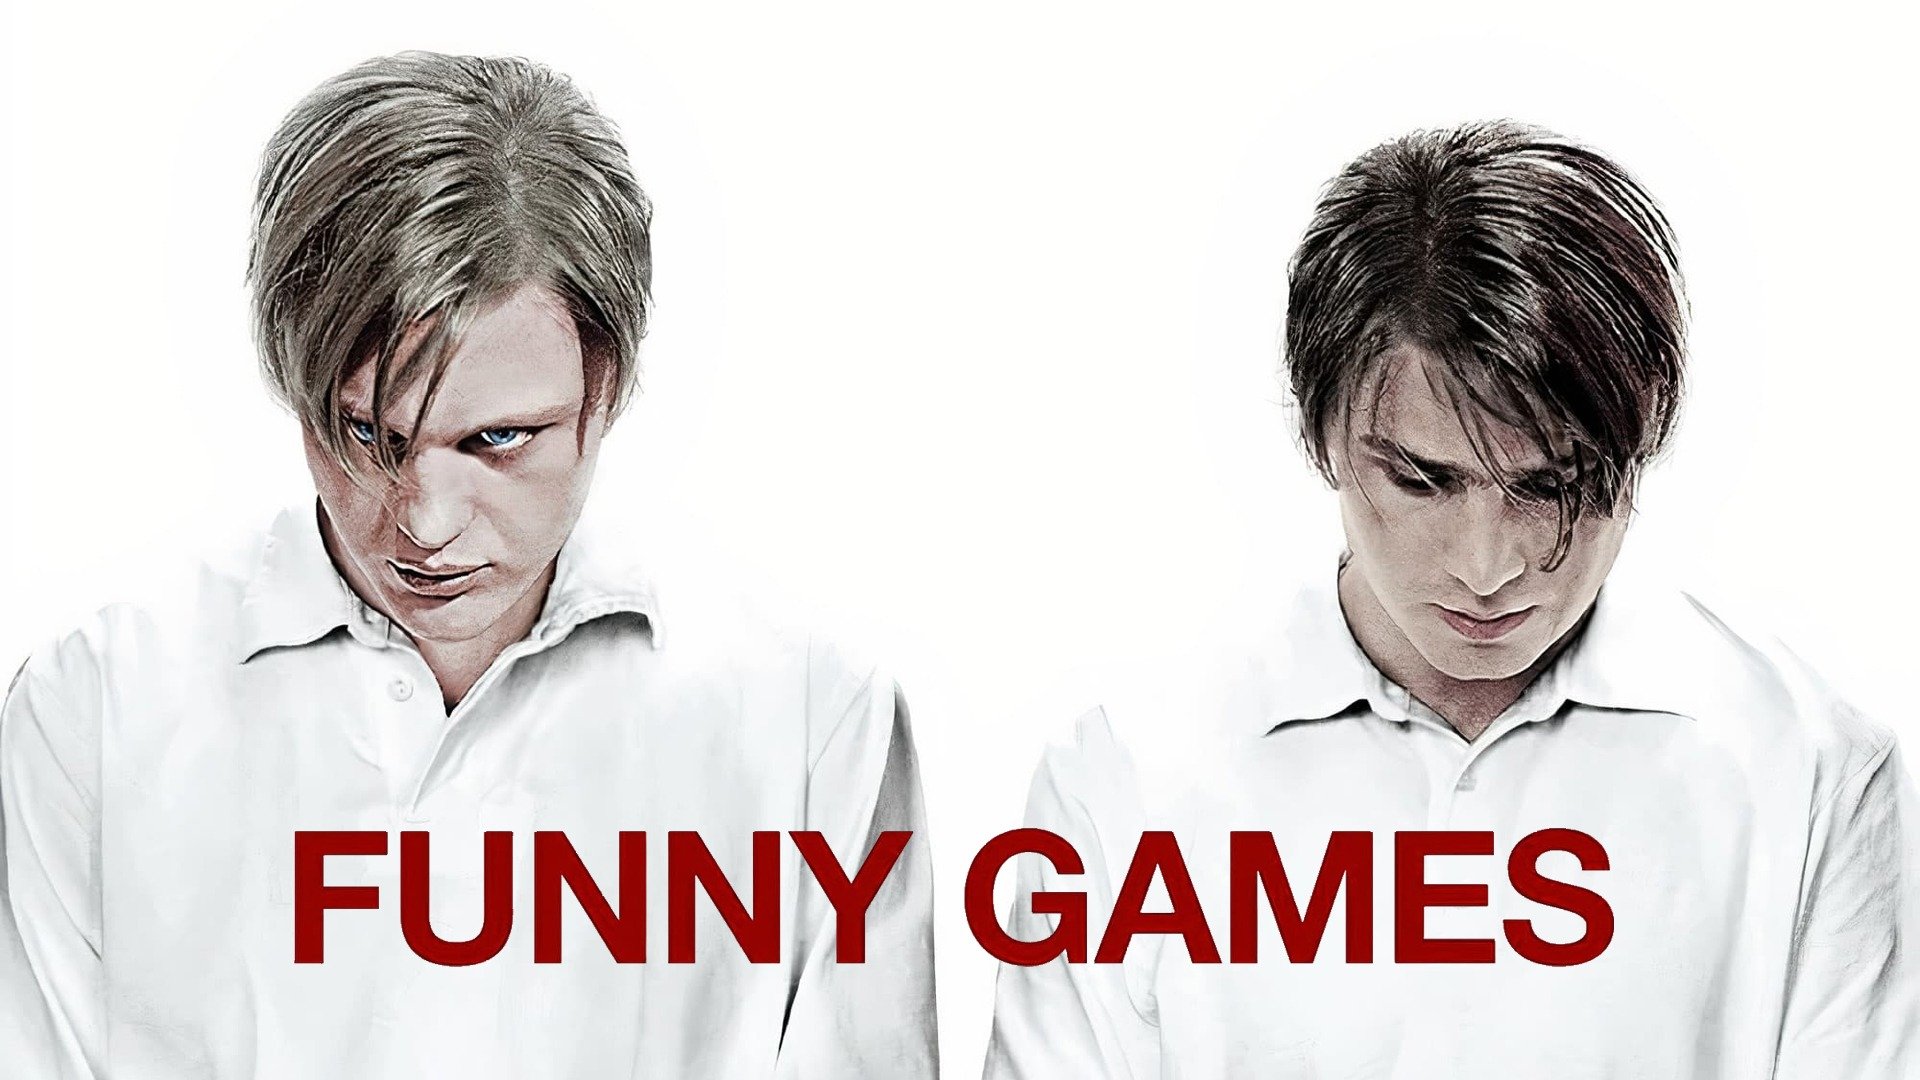 31 days of horror movies: Funny Games is deeply disturbing